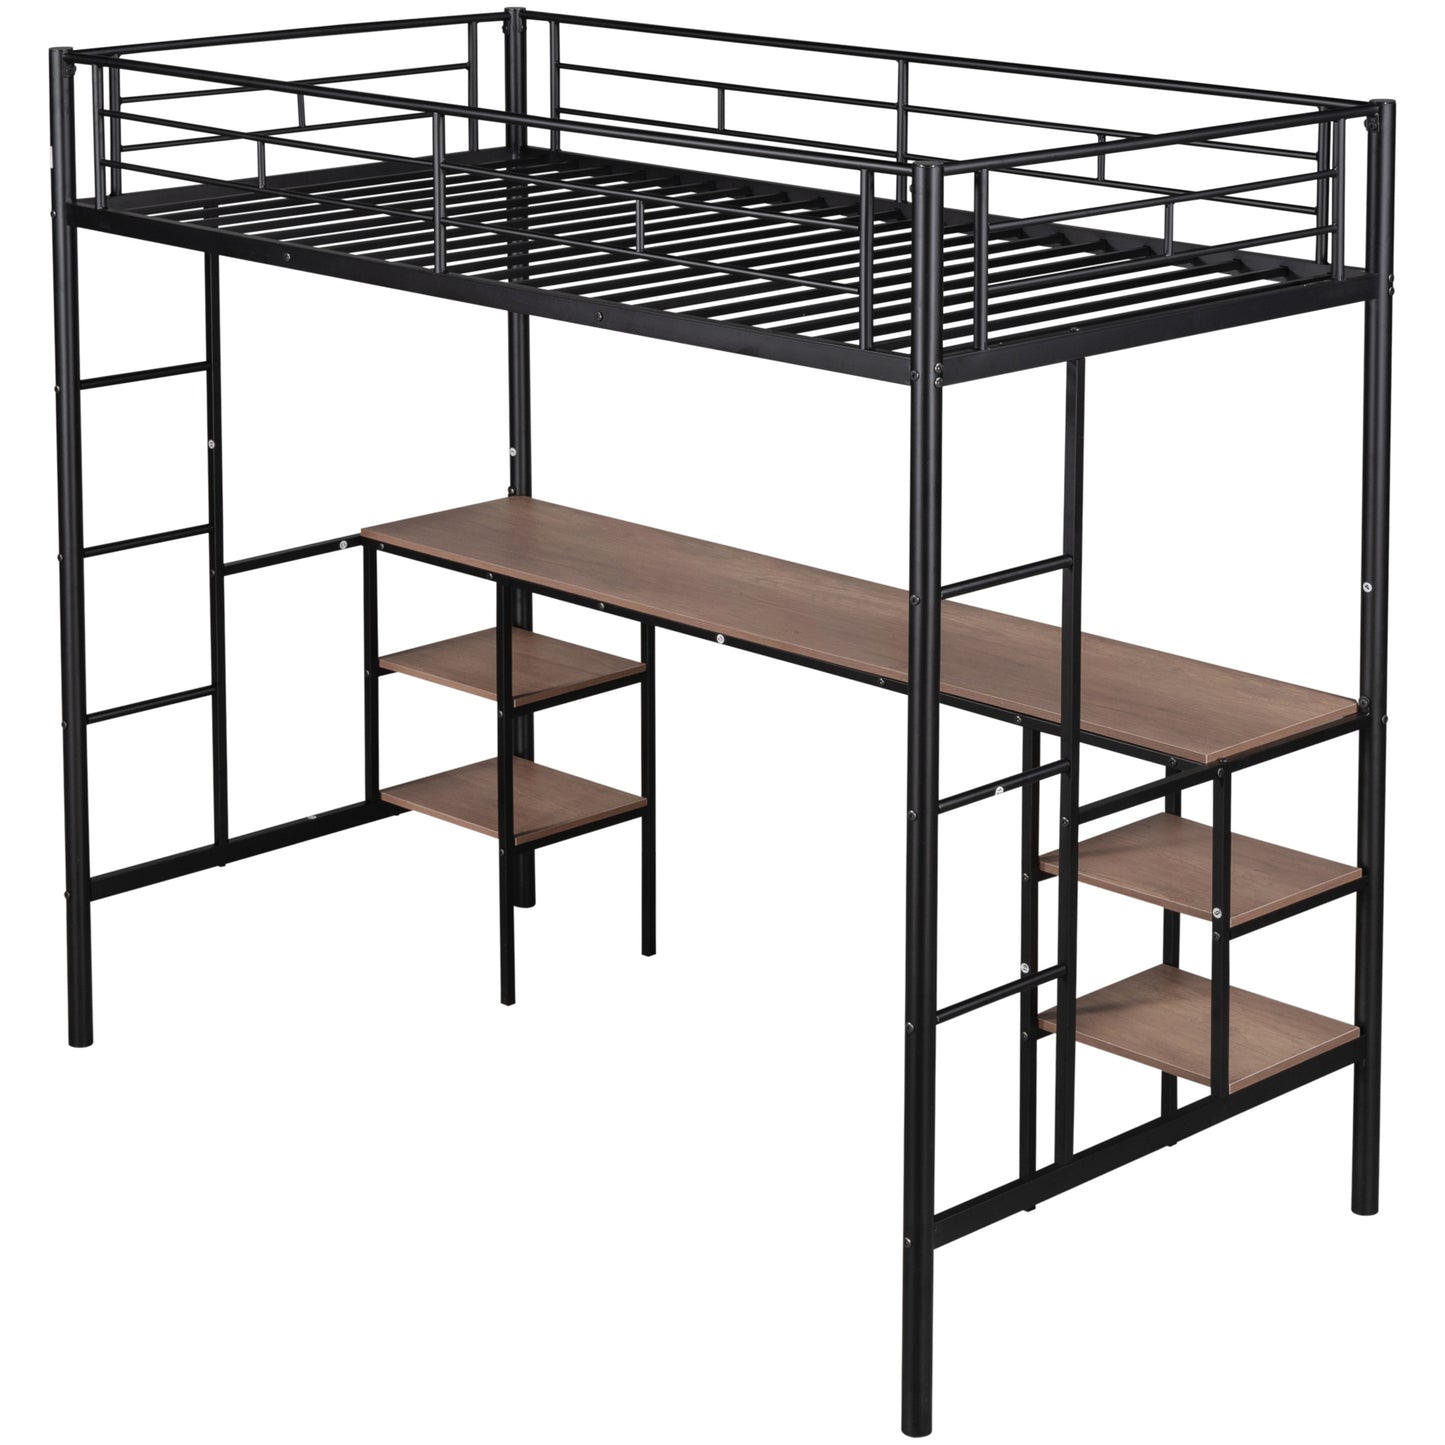 SYNGAR Metal Twin Loft Bed with Desk and Storage Shelves, Space-Saving Bed Frame with Bilateral Ladders and Safety Guard Rails for Kids Teens Adults, No Box Spring Needed